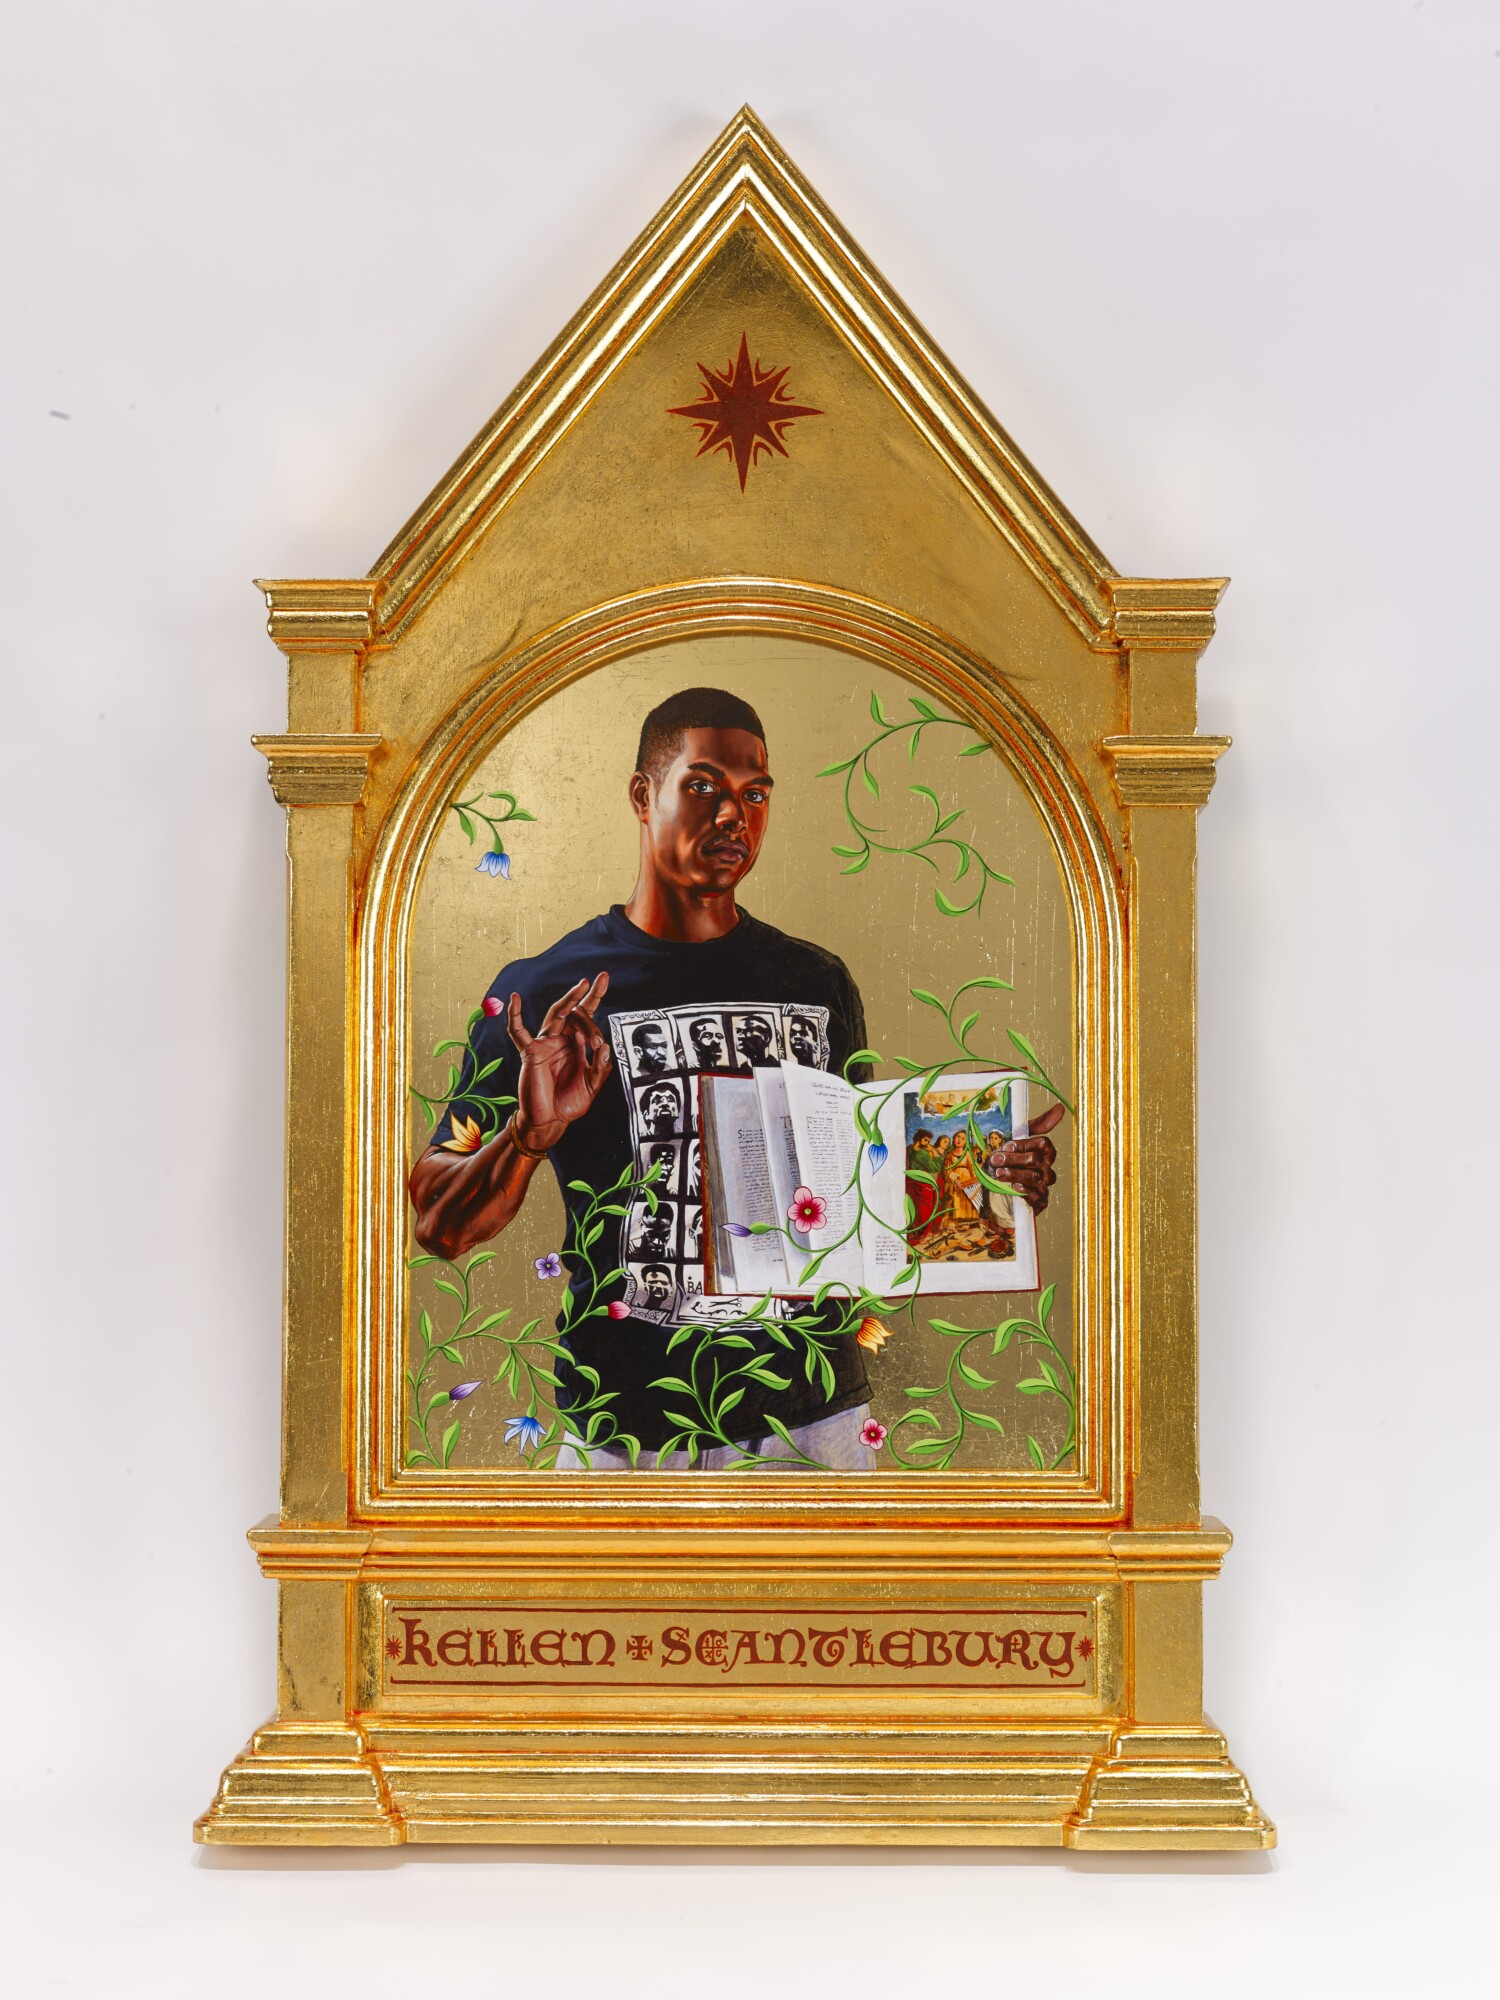 kehindewiley_a new republic_King and High Priest